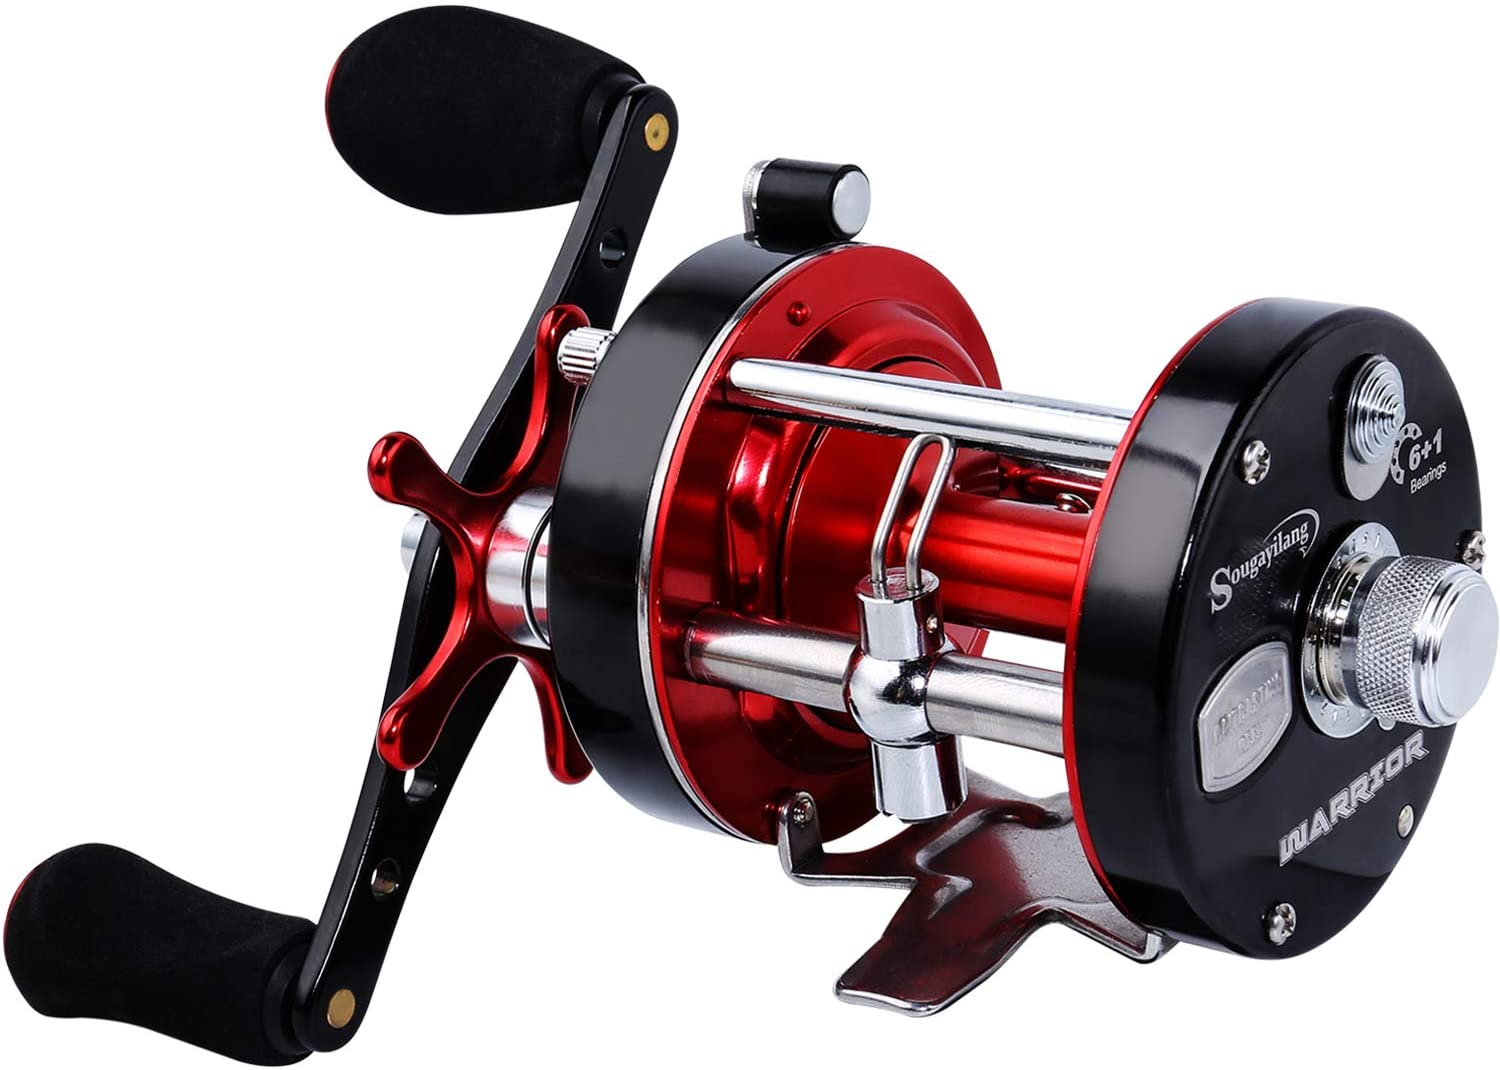 Sougayilang Round Baitcasting Reel Reinforced Metal Body EVA Left/Right Handle Conventional Fishing Reel - image 1 of 7